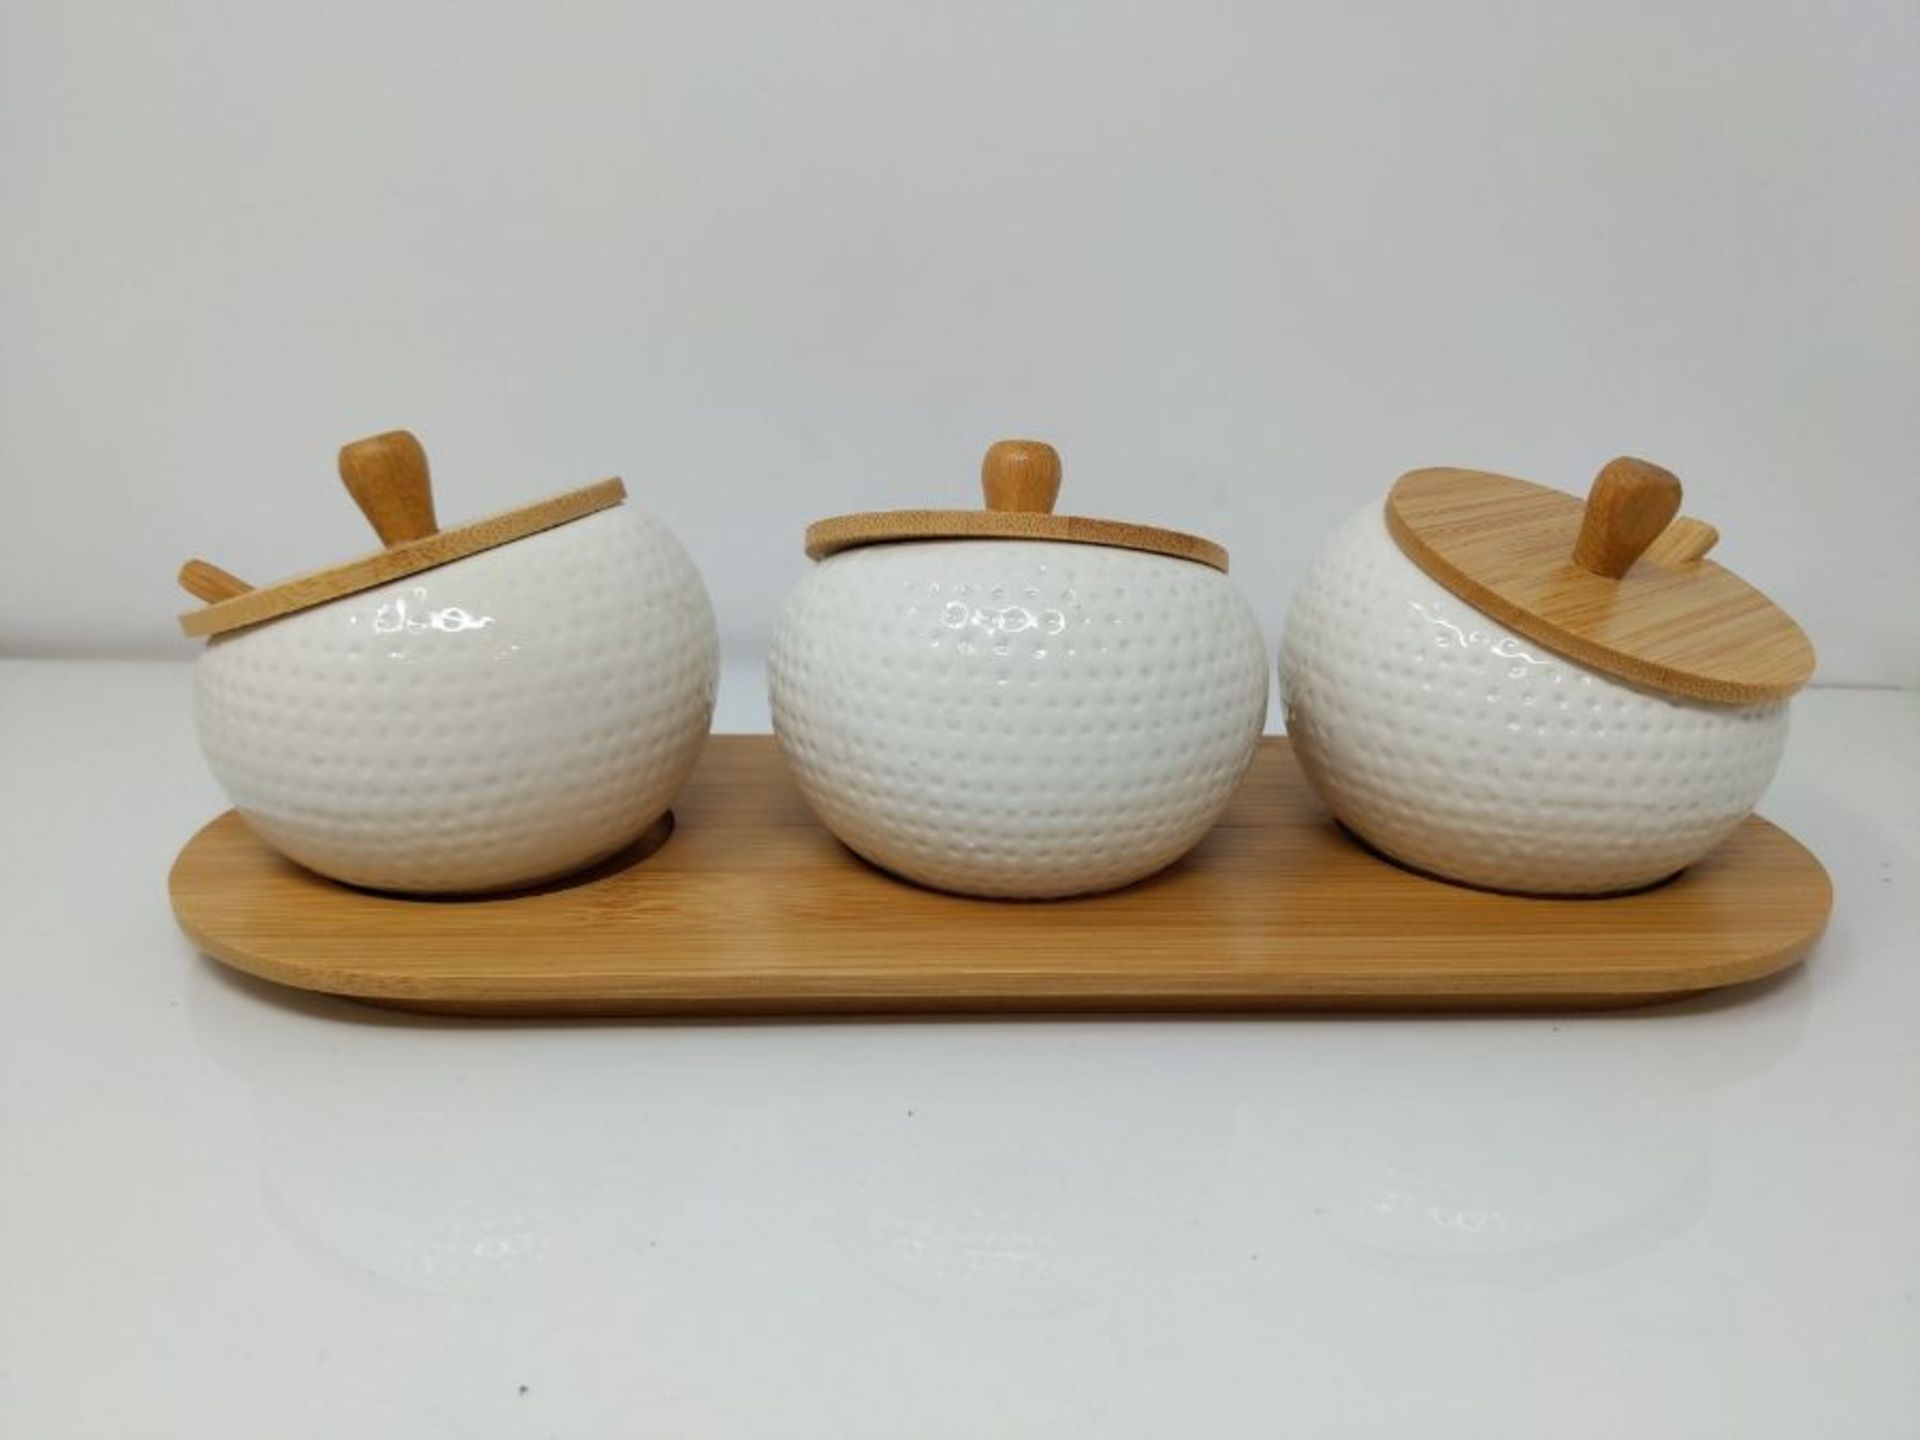 Relaxdays Jiao Jars Made of Ceramics with Bamboo Lid and Holder, Spice Storage Solutio - Image 2 of 2